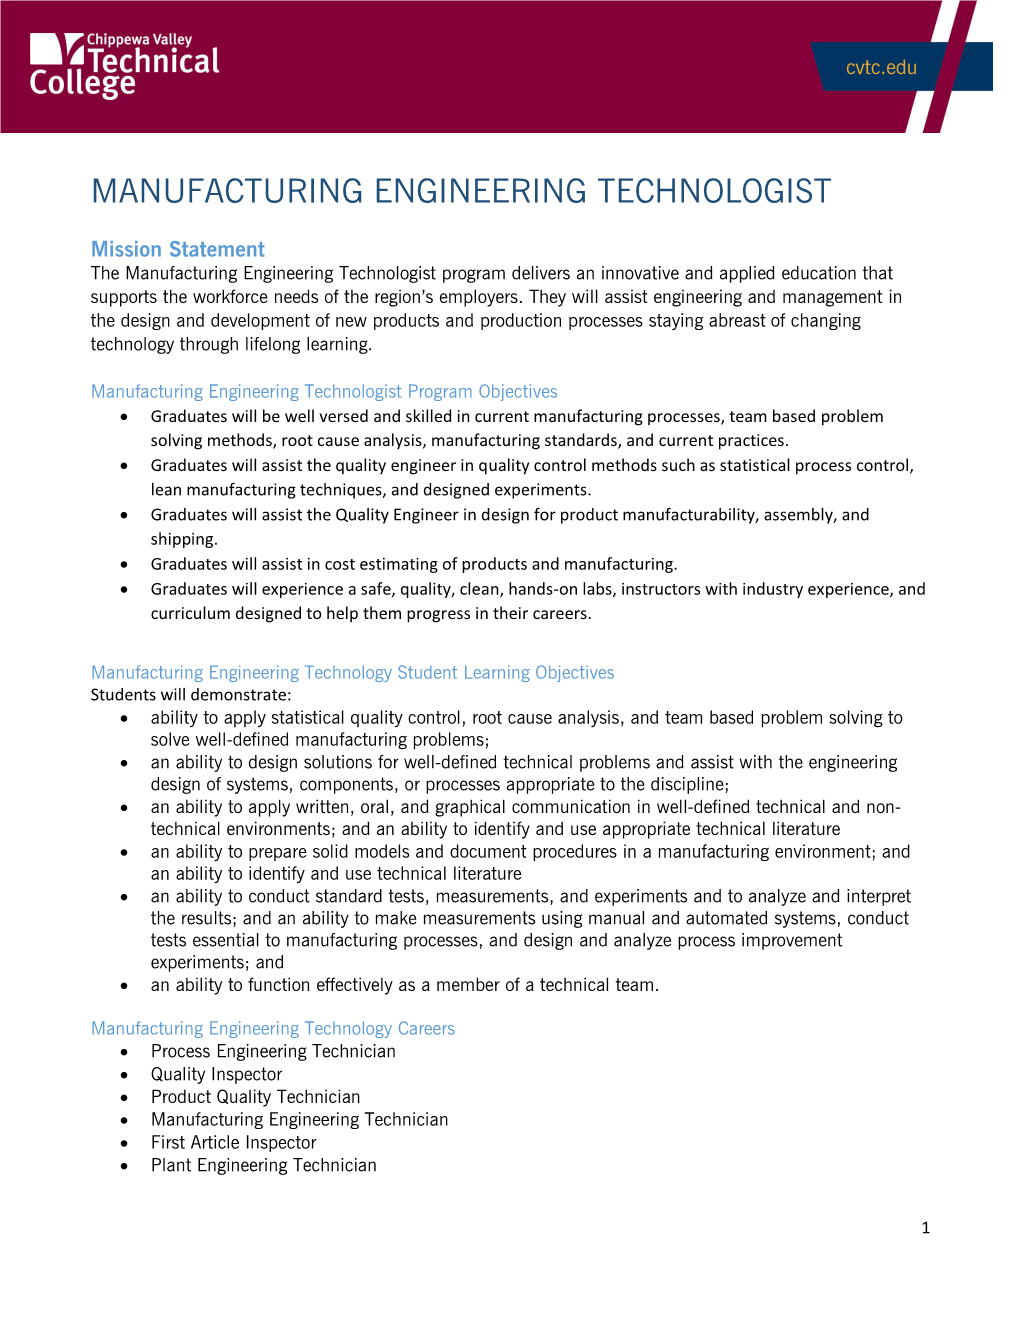 Manufacturing Engineering Technologist